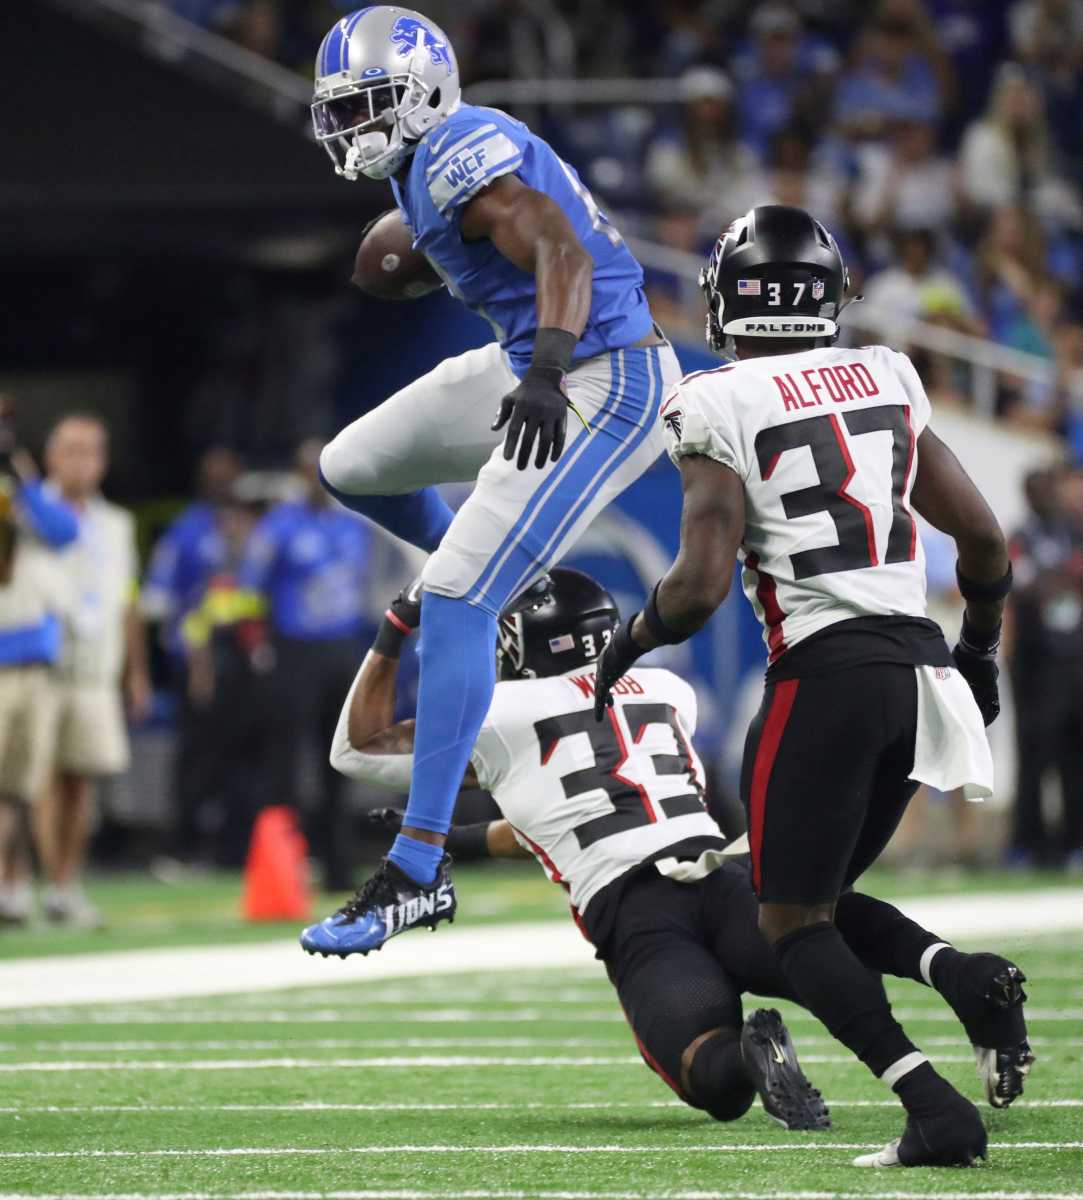 Falcons vs. Lions picks: Best player prop bets for Week 3 NFL